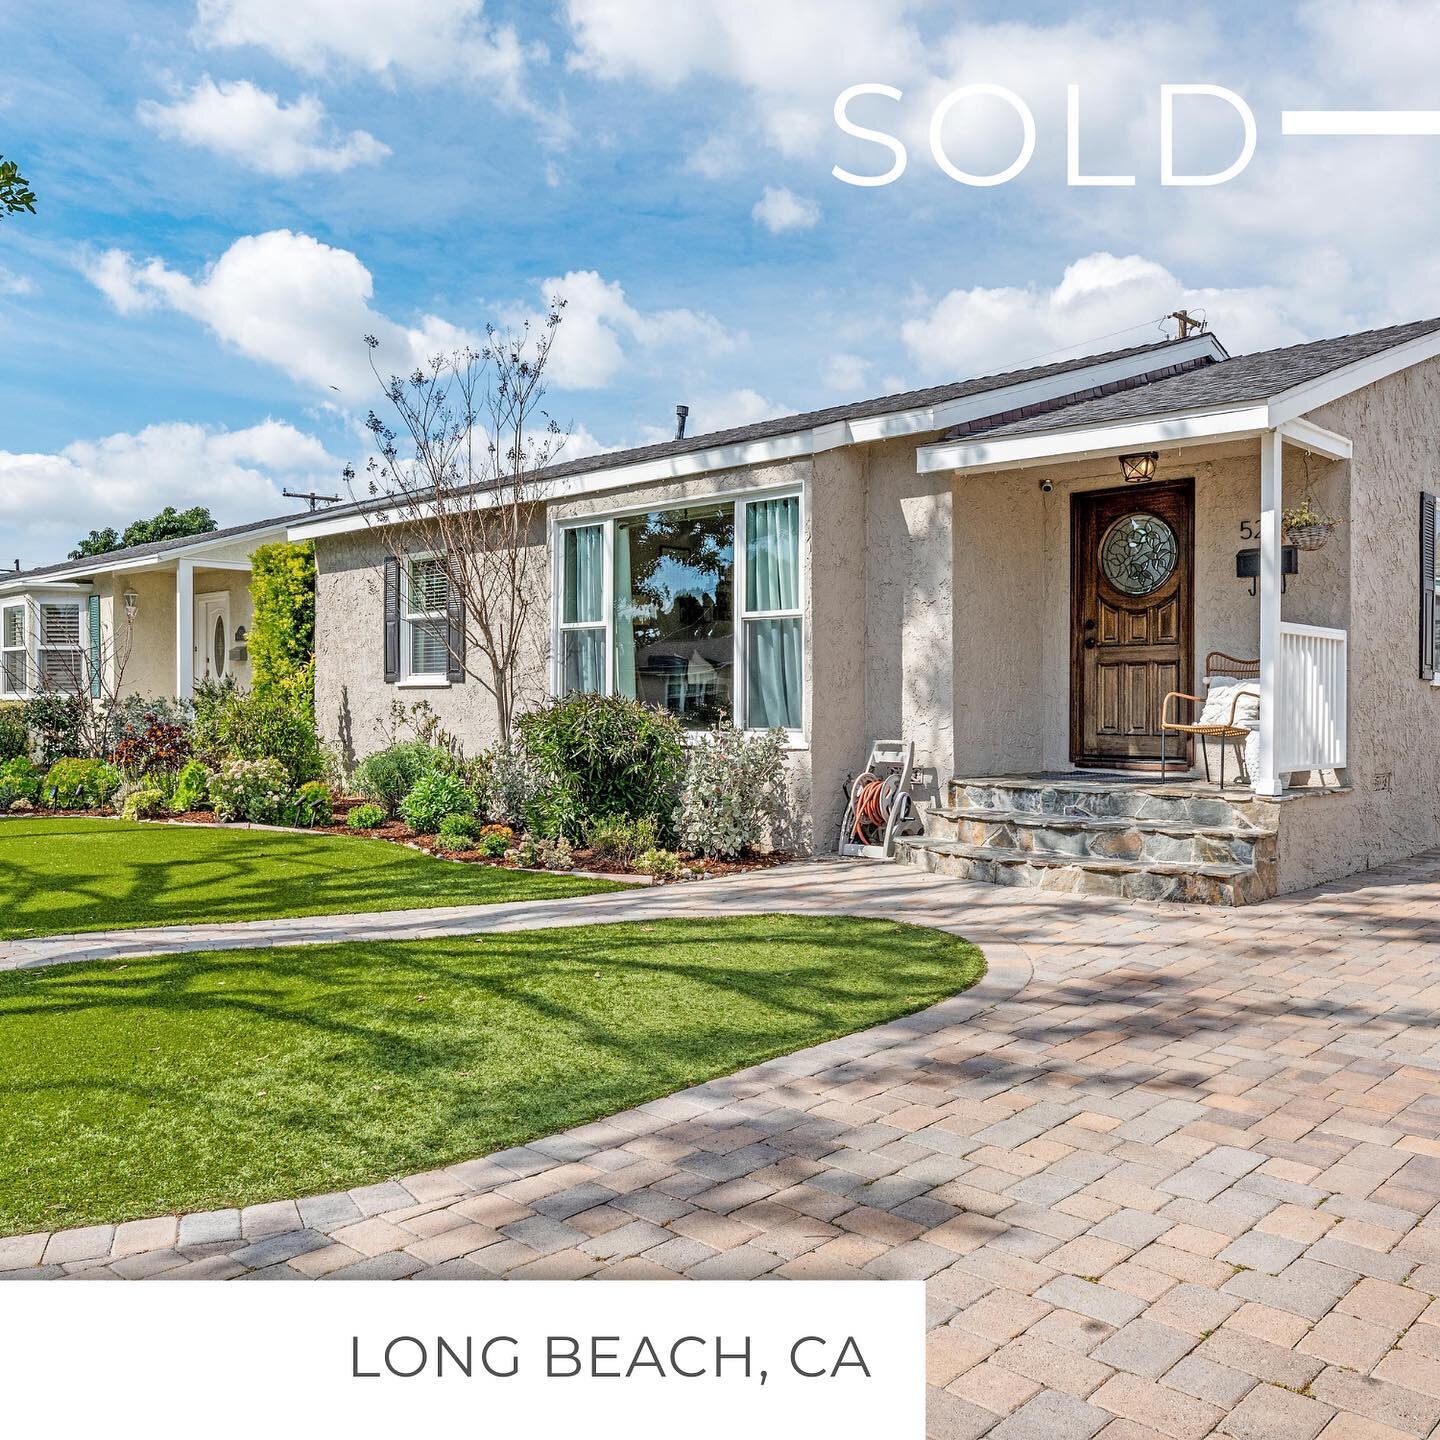 Happy Monday! Congrats to our clients on the sale of their home. On to bigger and better adventures 🏔️ 
&bull;
&bull;
&bull;
&bull;
&bull;
#buyingandselling #realestate #longbeach #kellerwilliams #kwpe #justsold #familyhome #forsale #nottinghamreg #